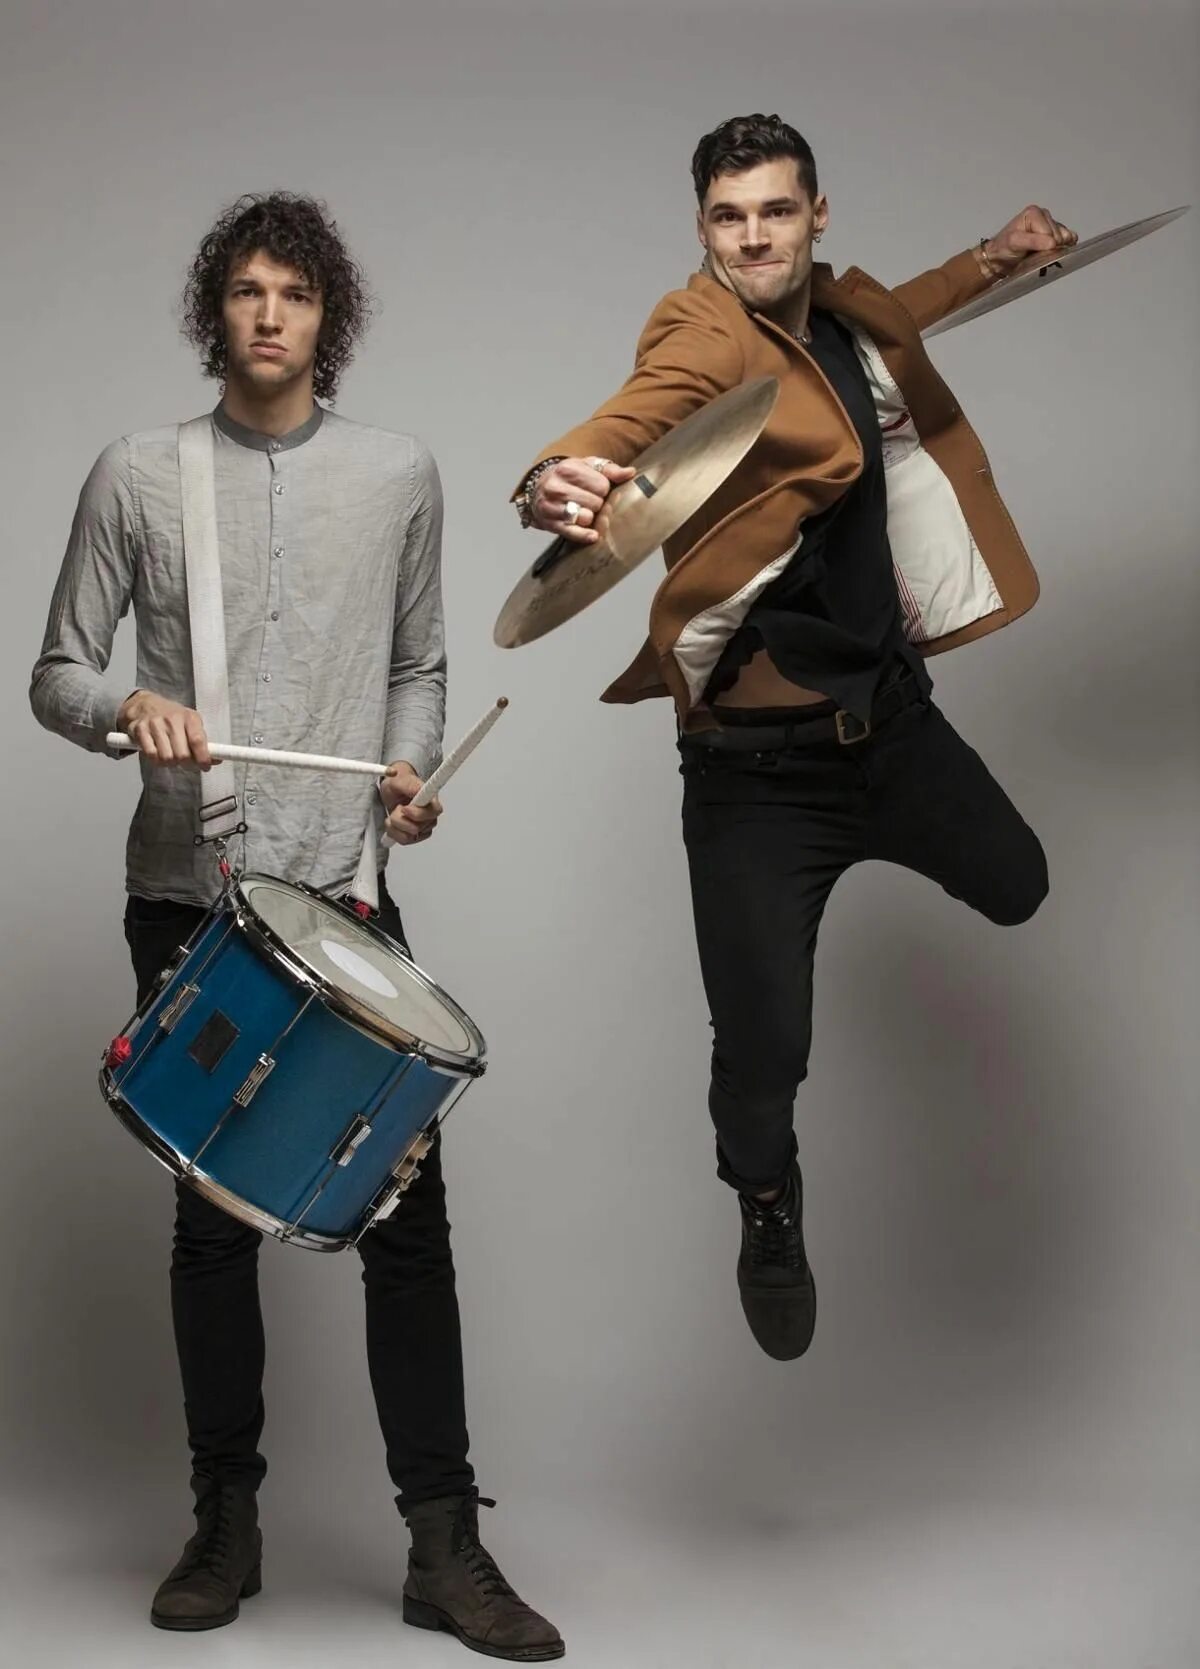 Brothers country. For King and Country. For King & Country братья?. Джоэл Смоллбоун. For King and Country концерт.